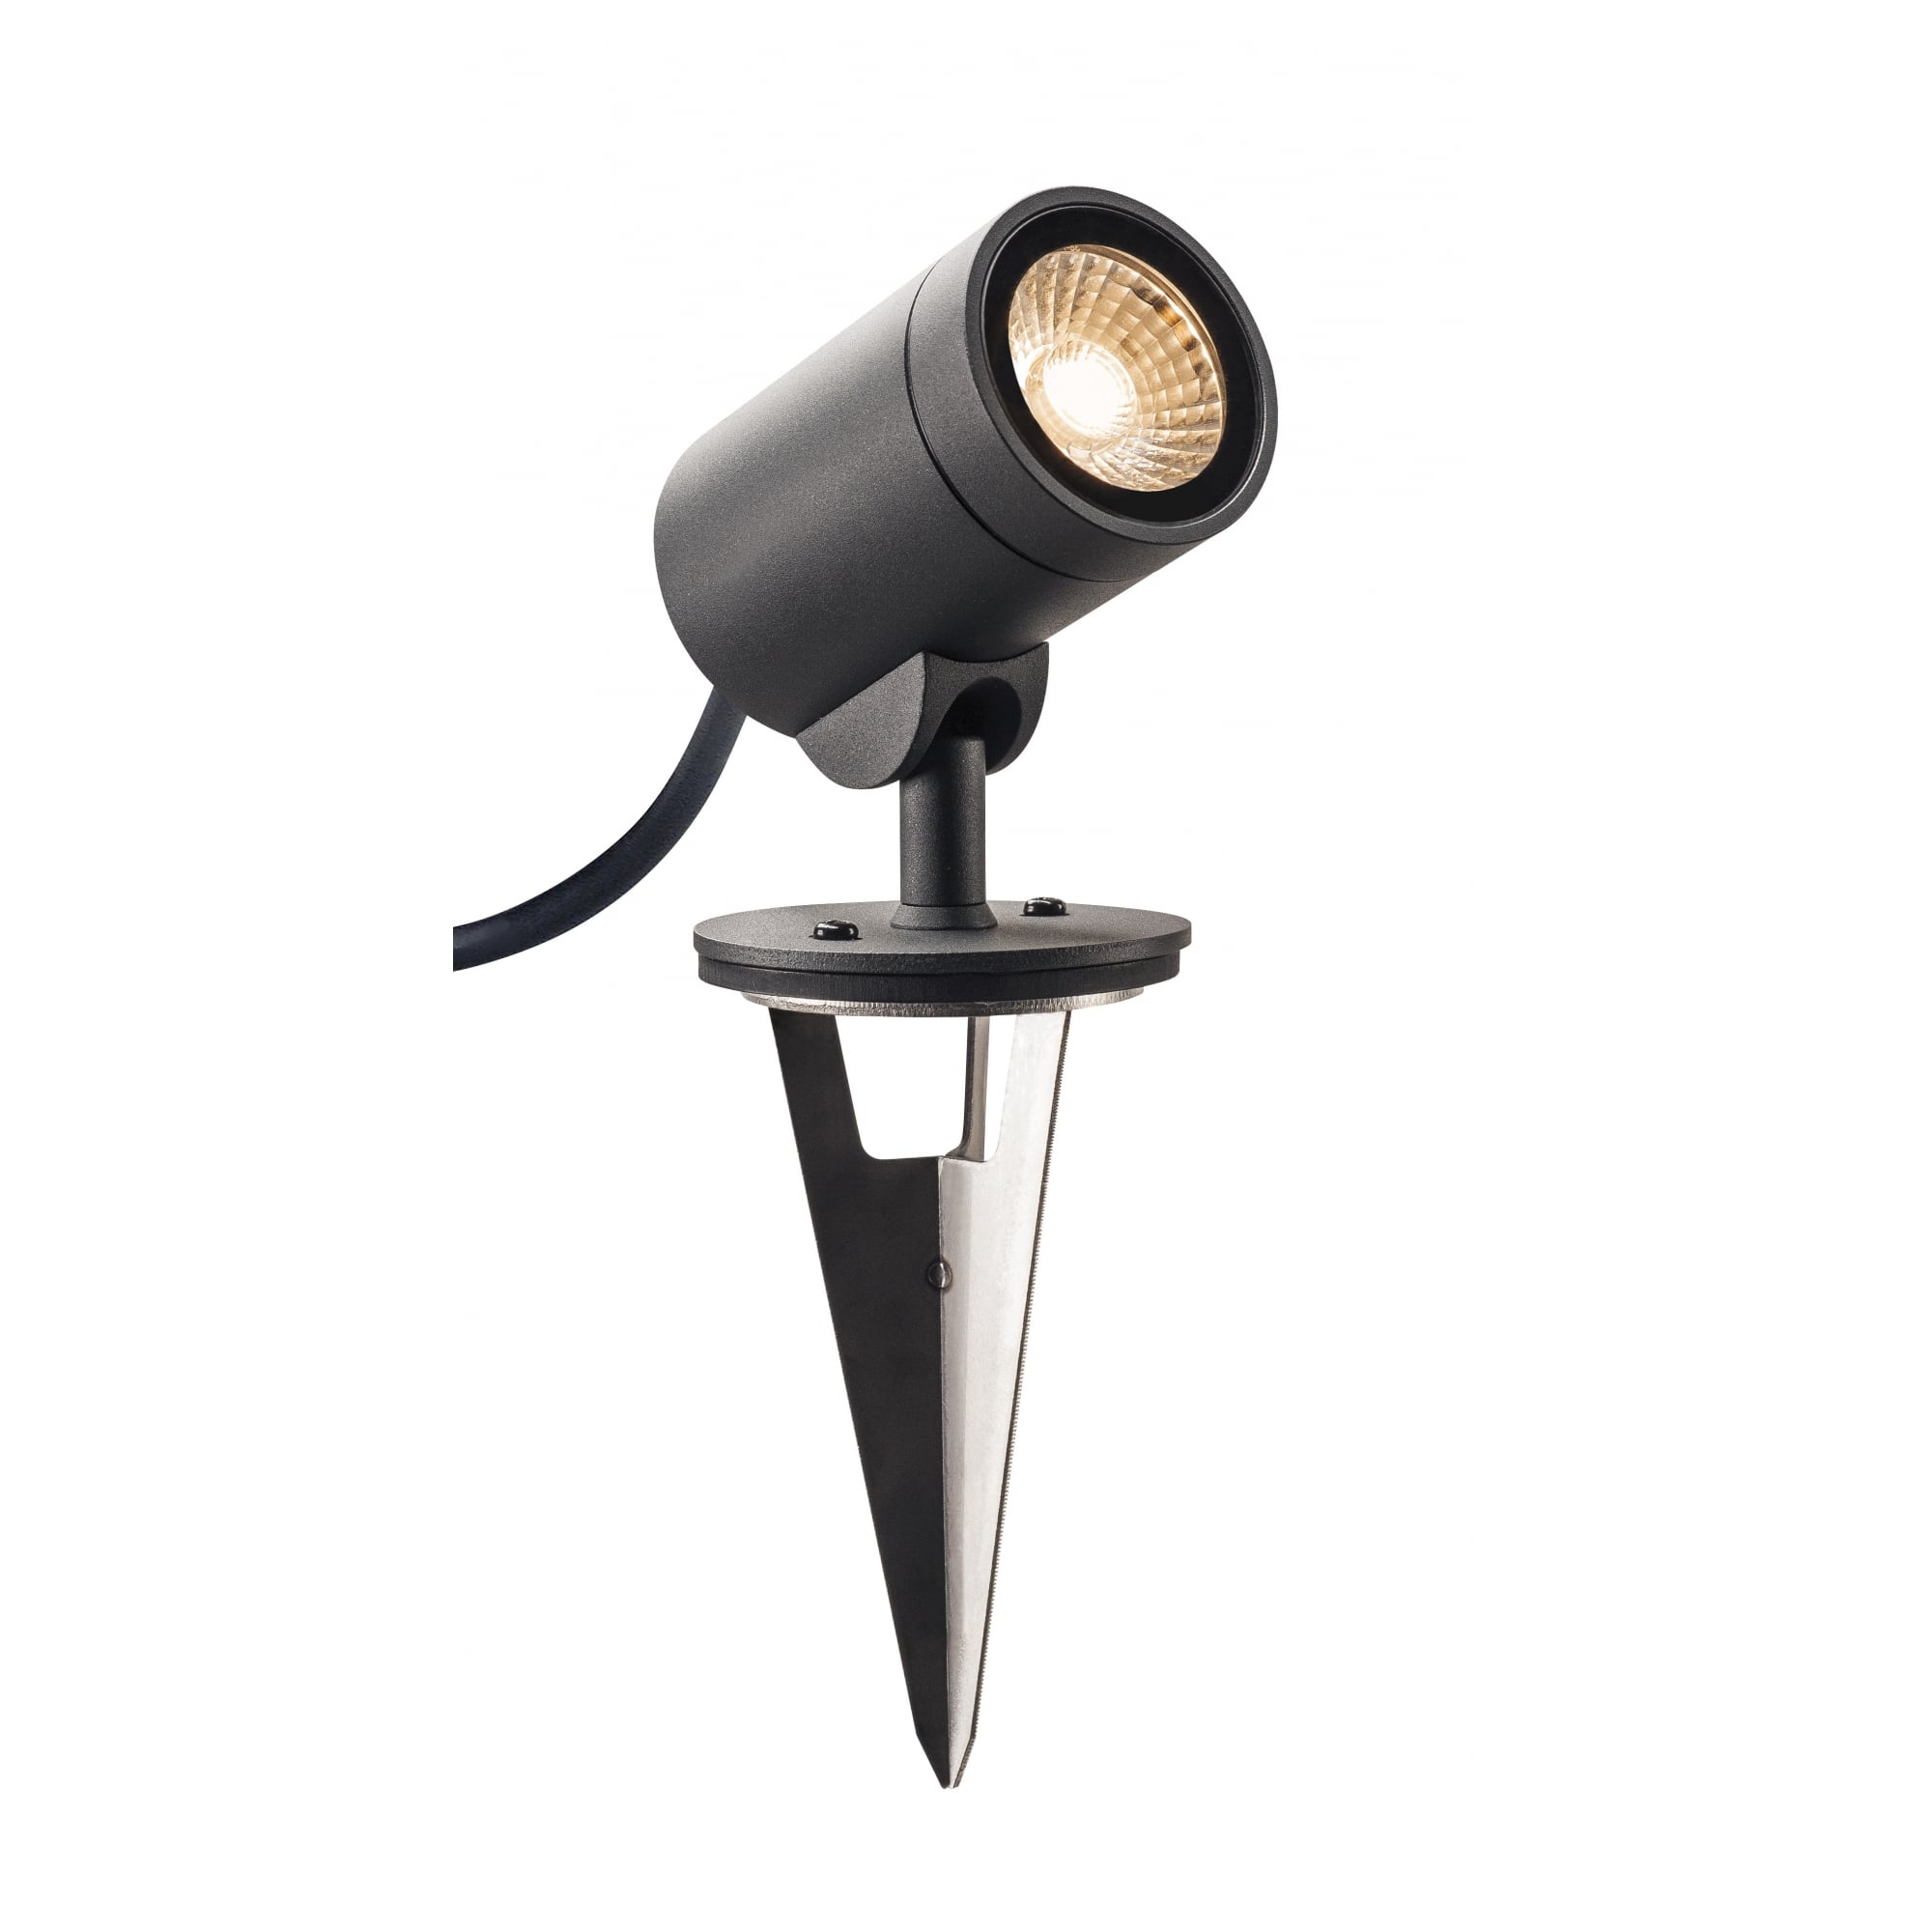 Helia LED Spot, Outdoor Spot, 3000K, 35°, Anthracite, IP55